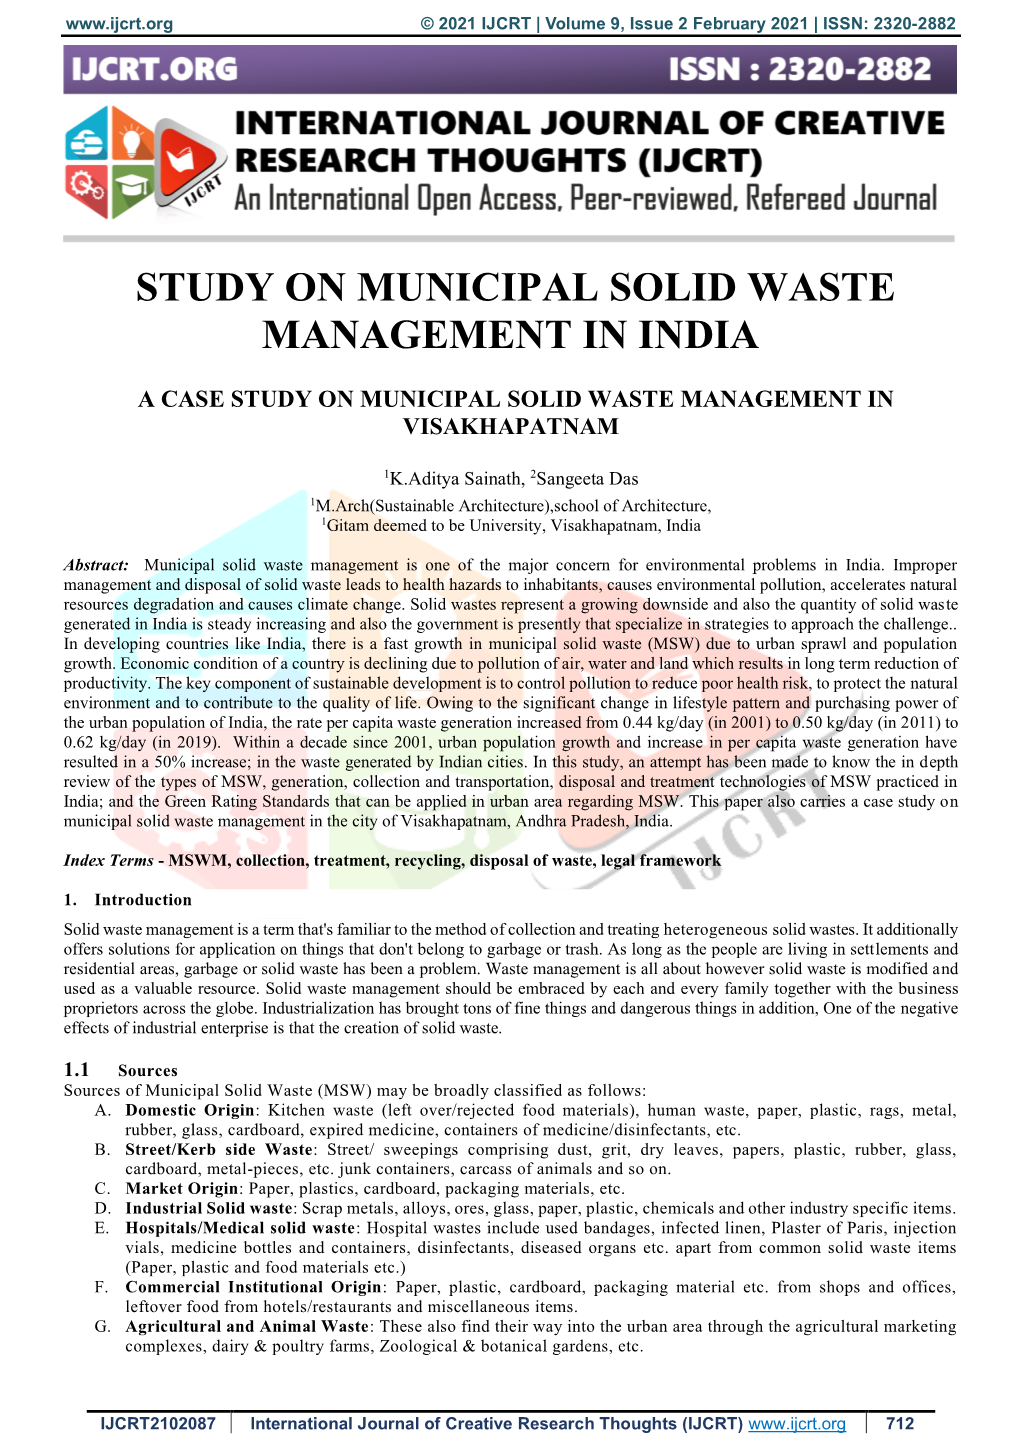 Study on Municipal Solid Waste Management in India